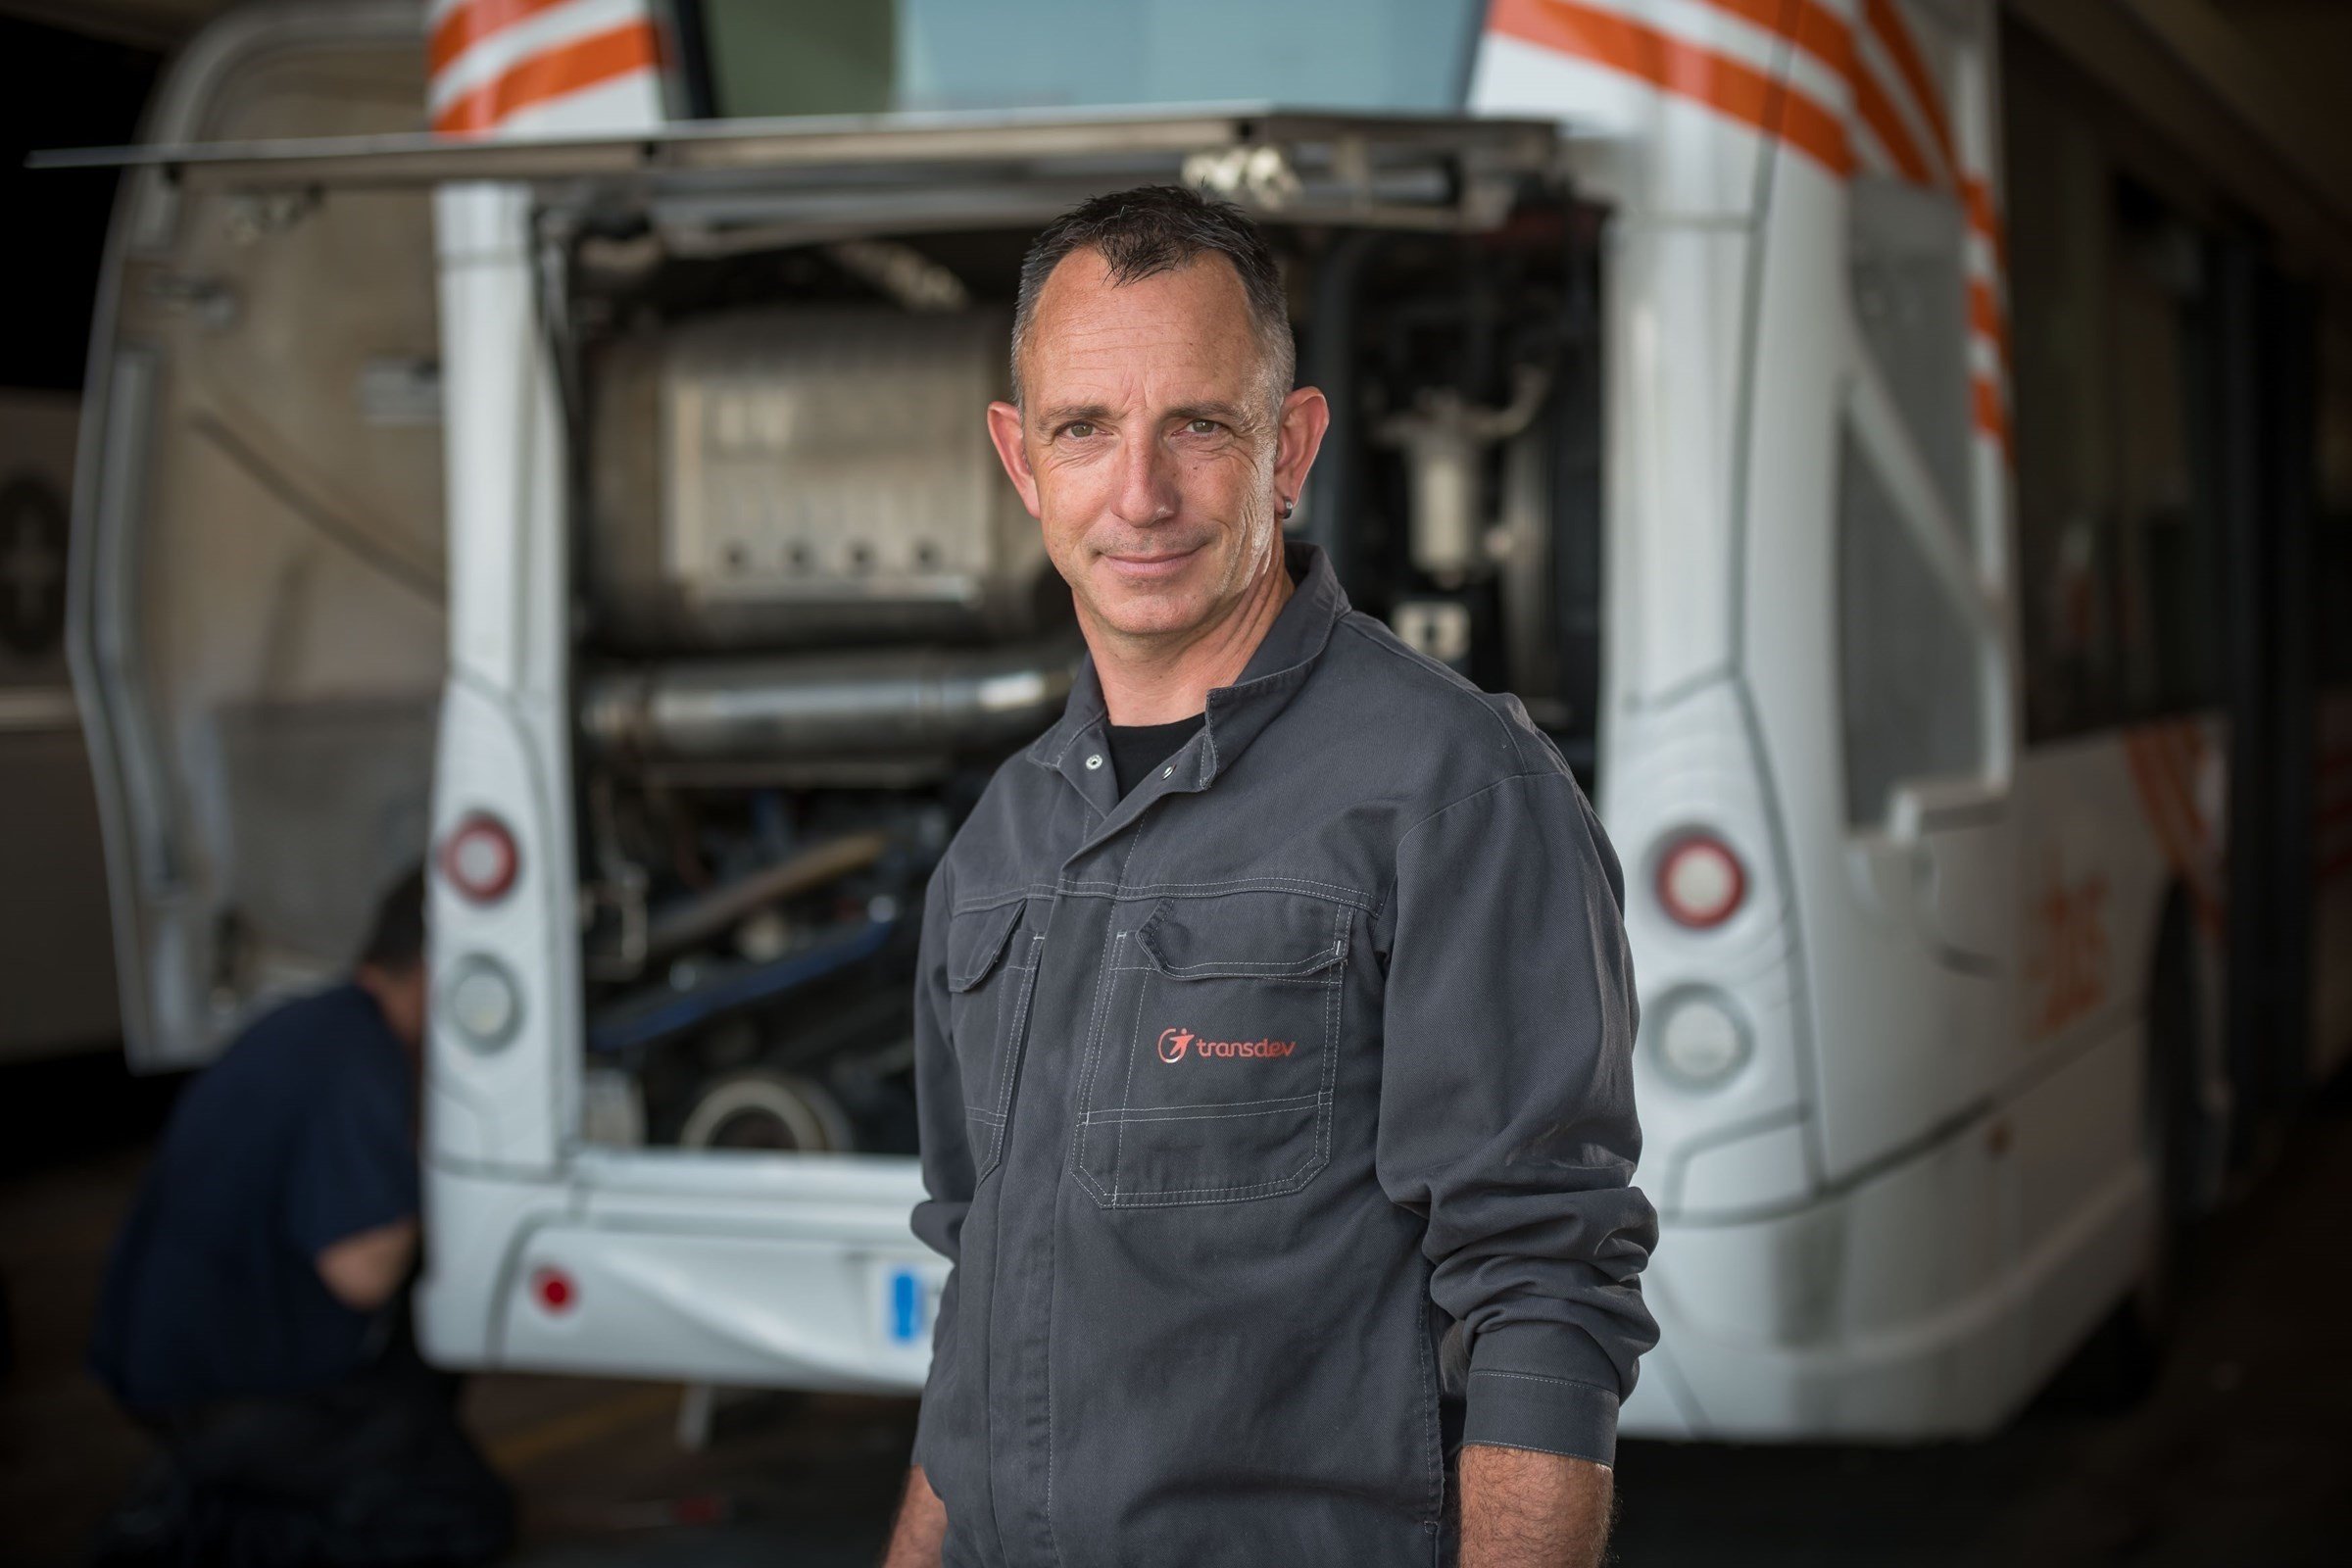 smiling man in a dark grey shirt, posing in front of an open trunk of a bus